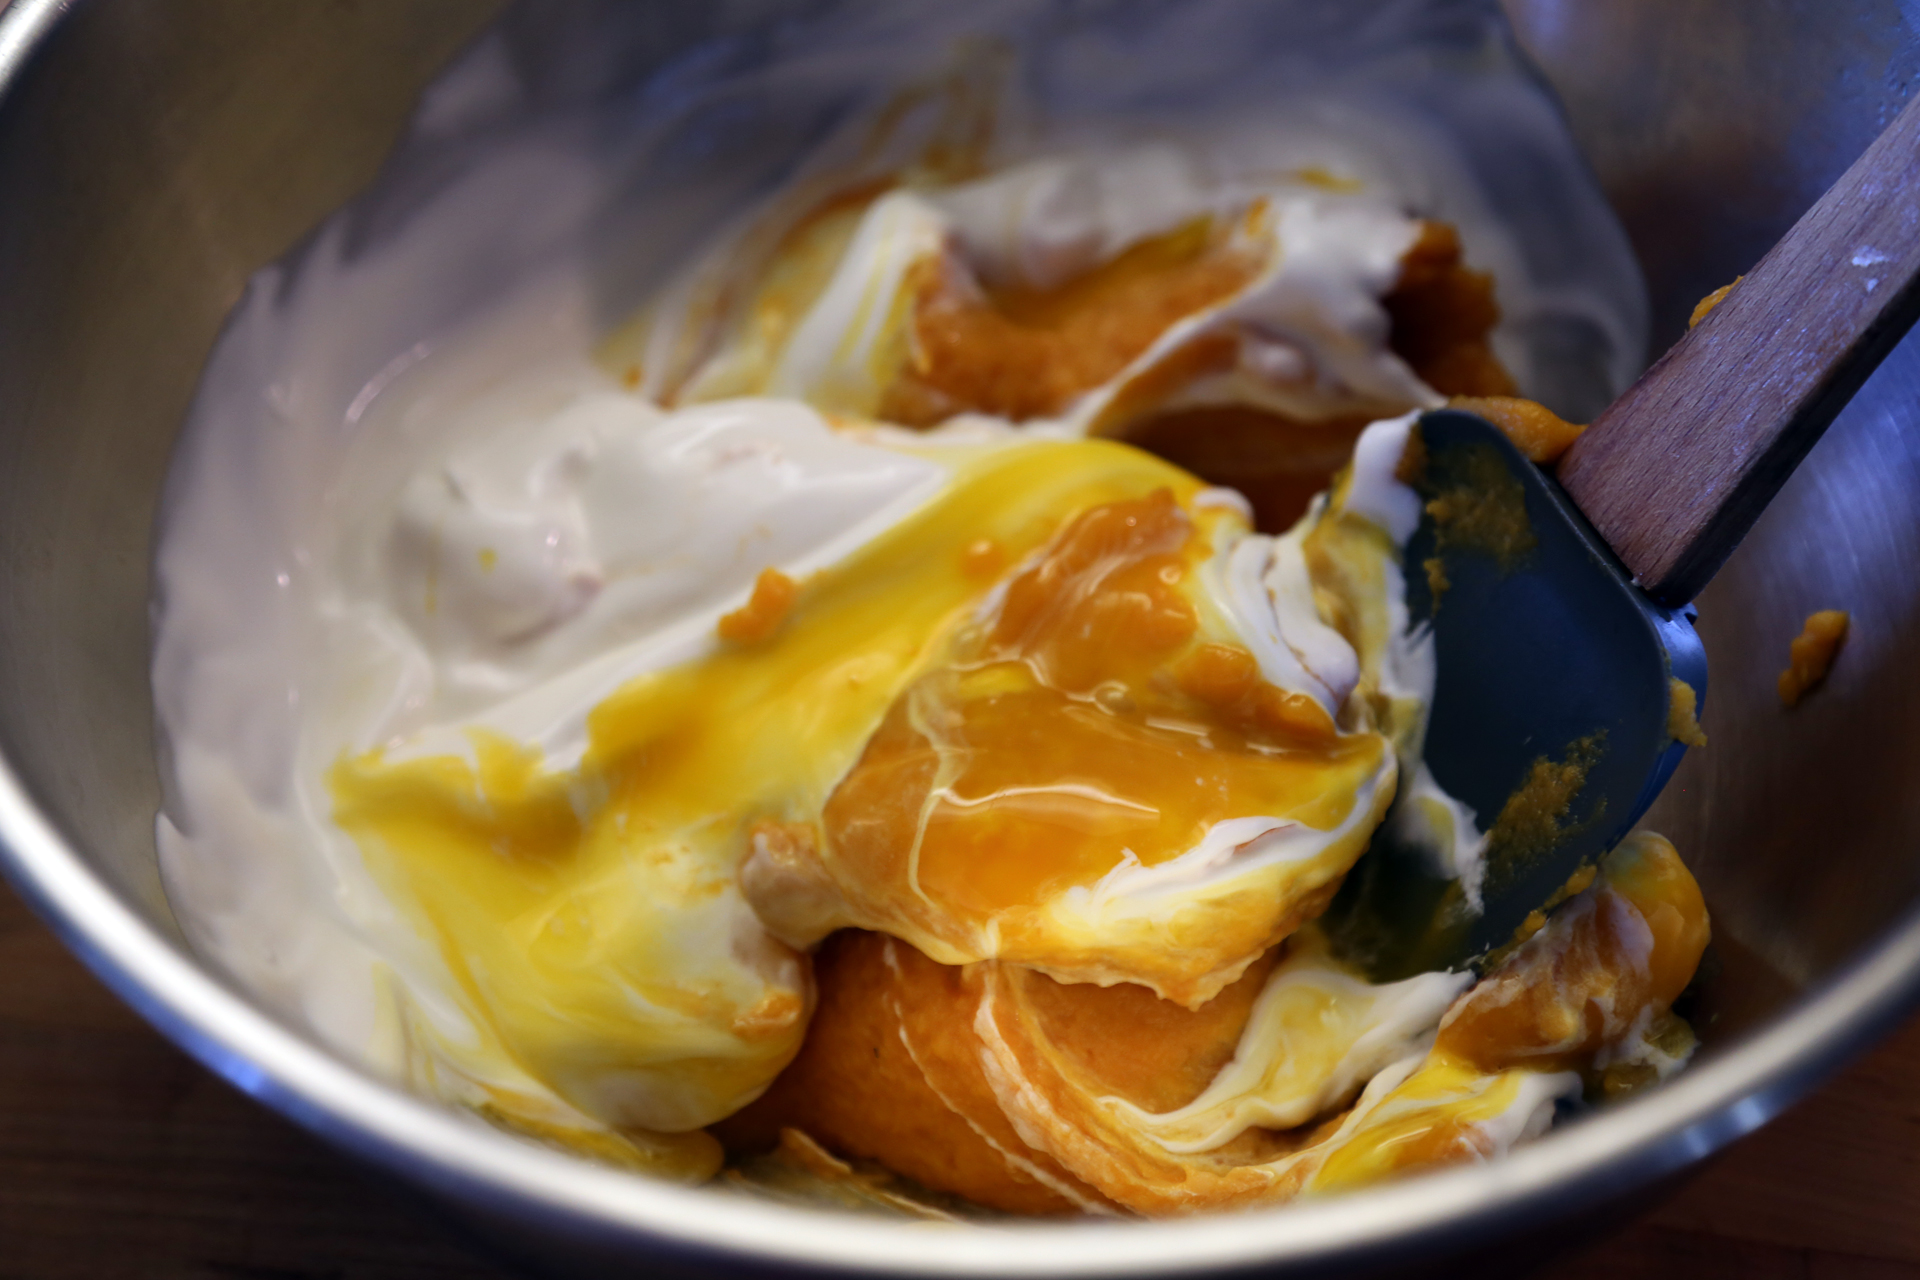 In a bowl, whisk together the butternut puree, crème fraiche, egg yolks.